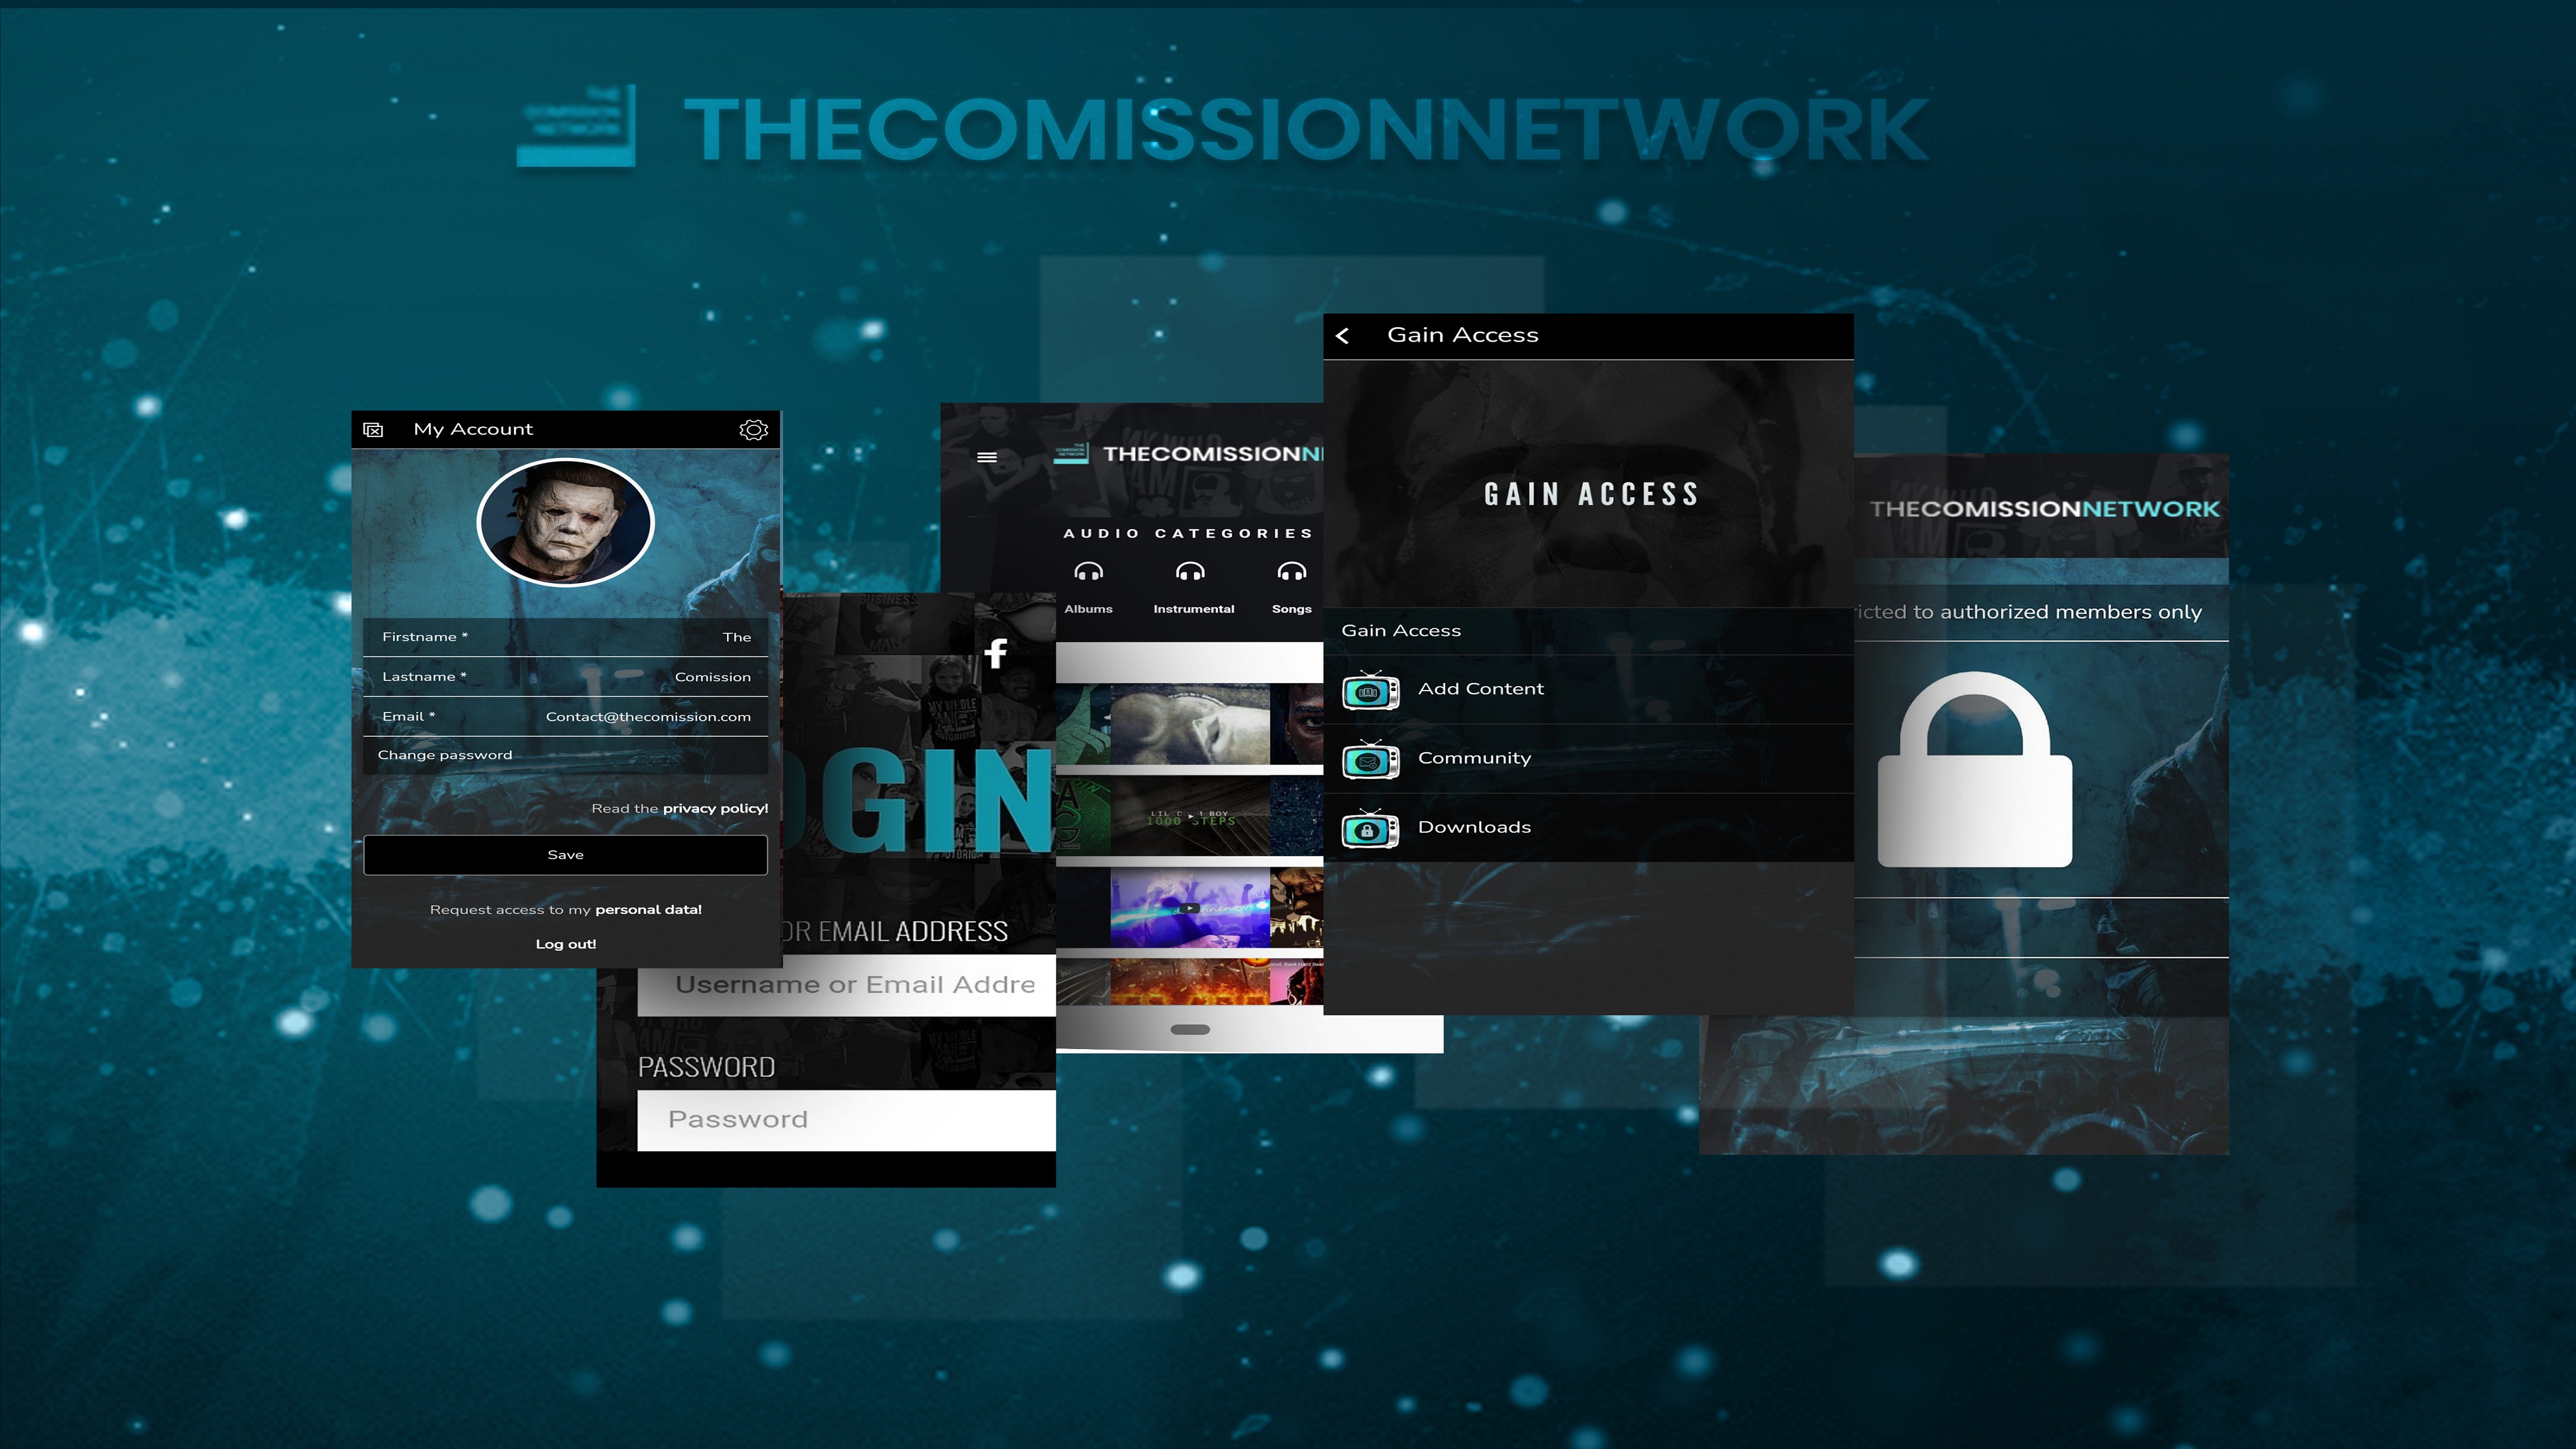 GAIN ACCESS: THECOMISSION NETWORK APP